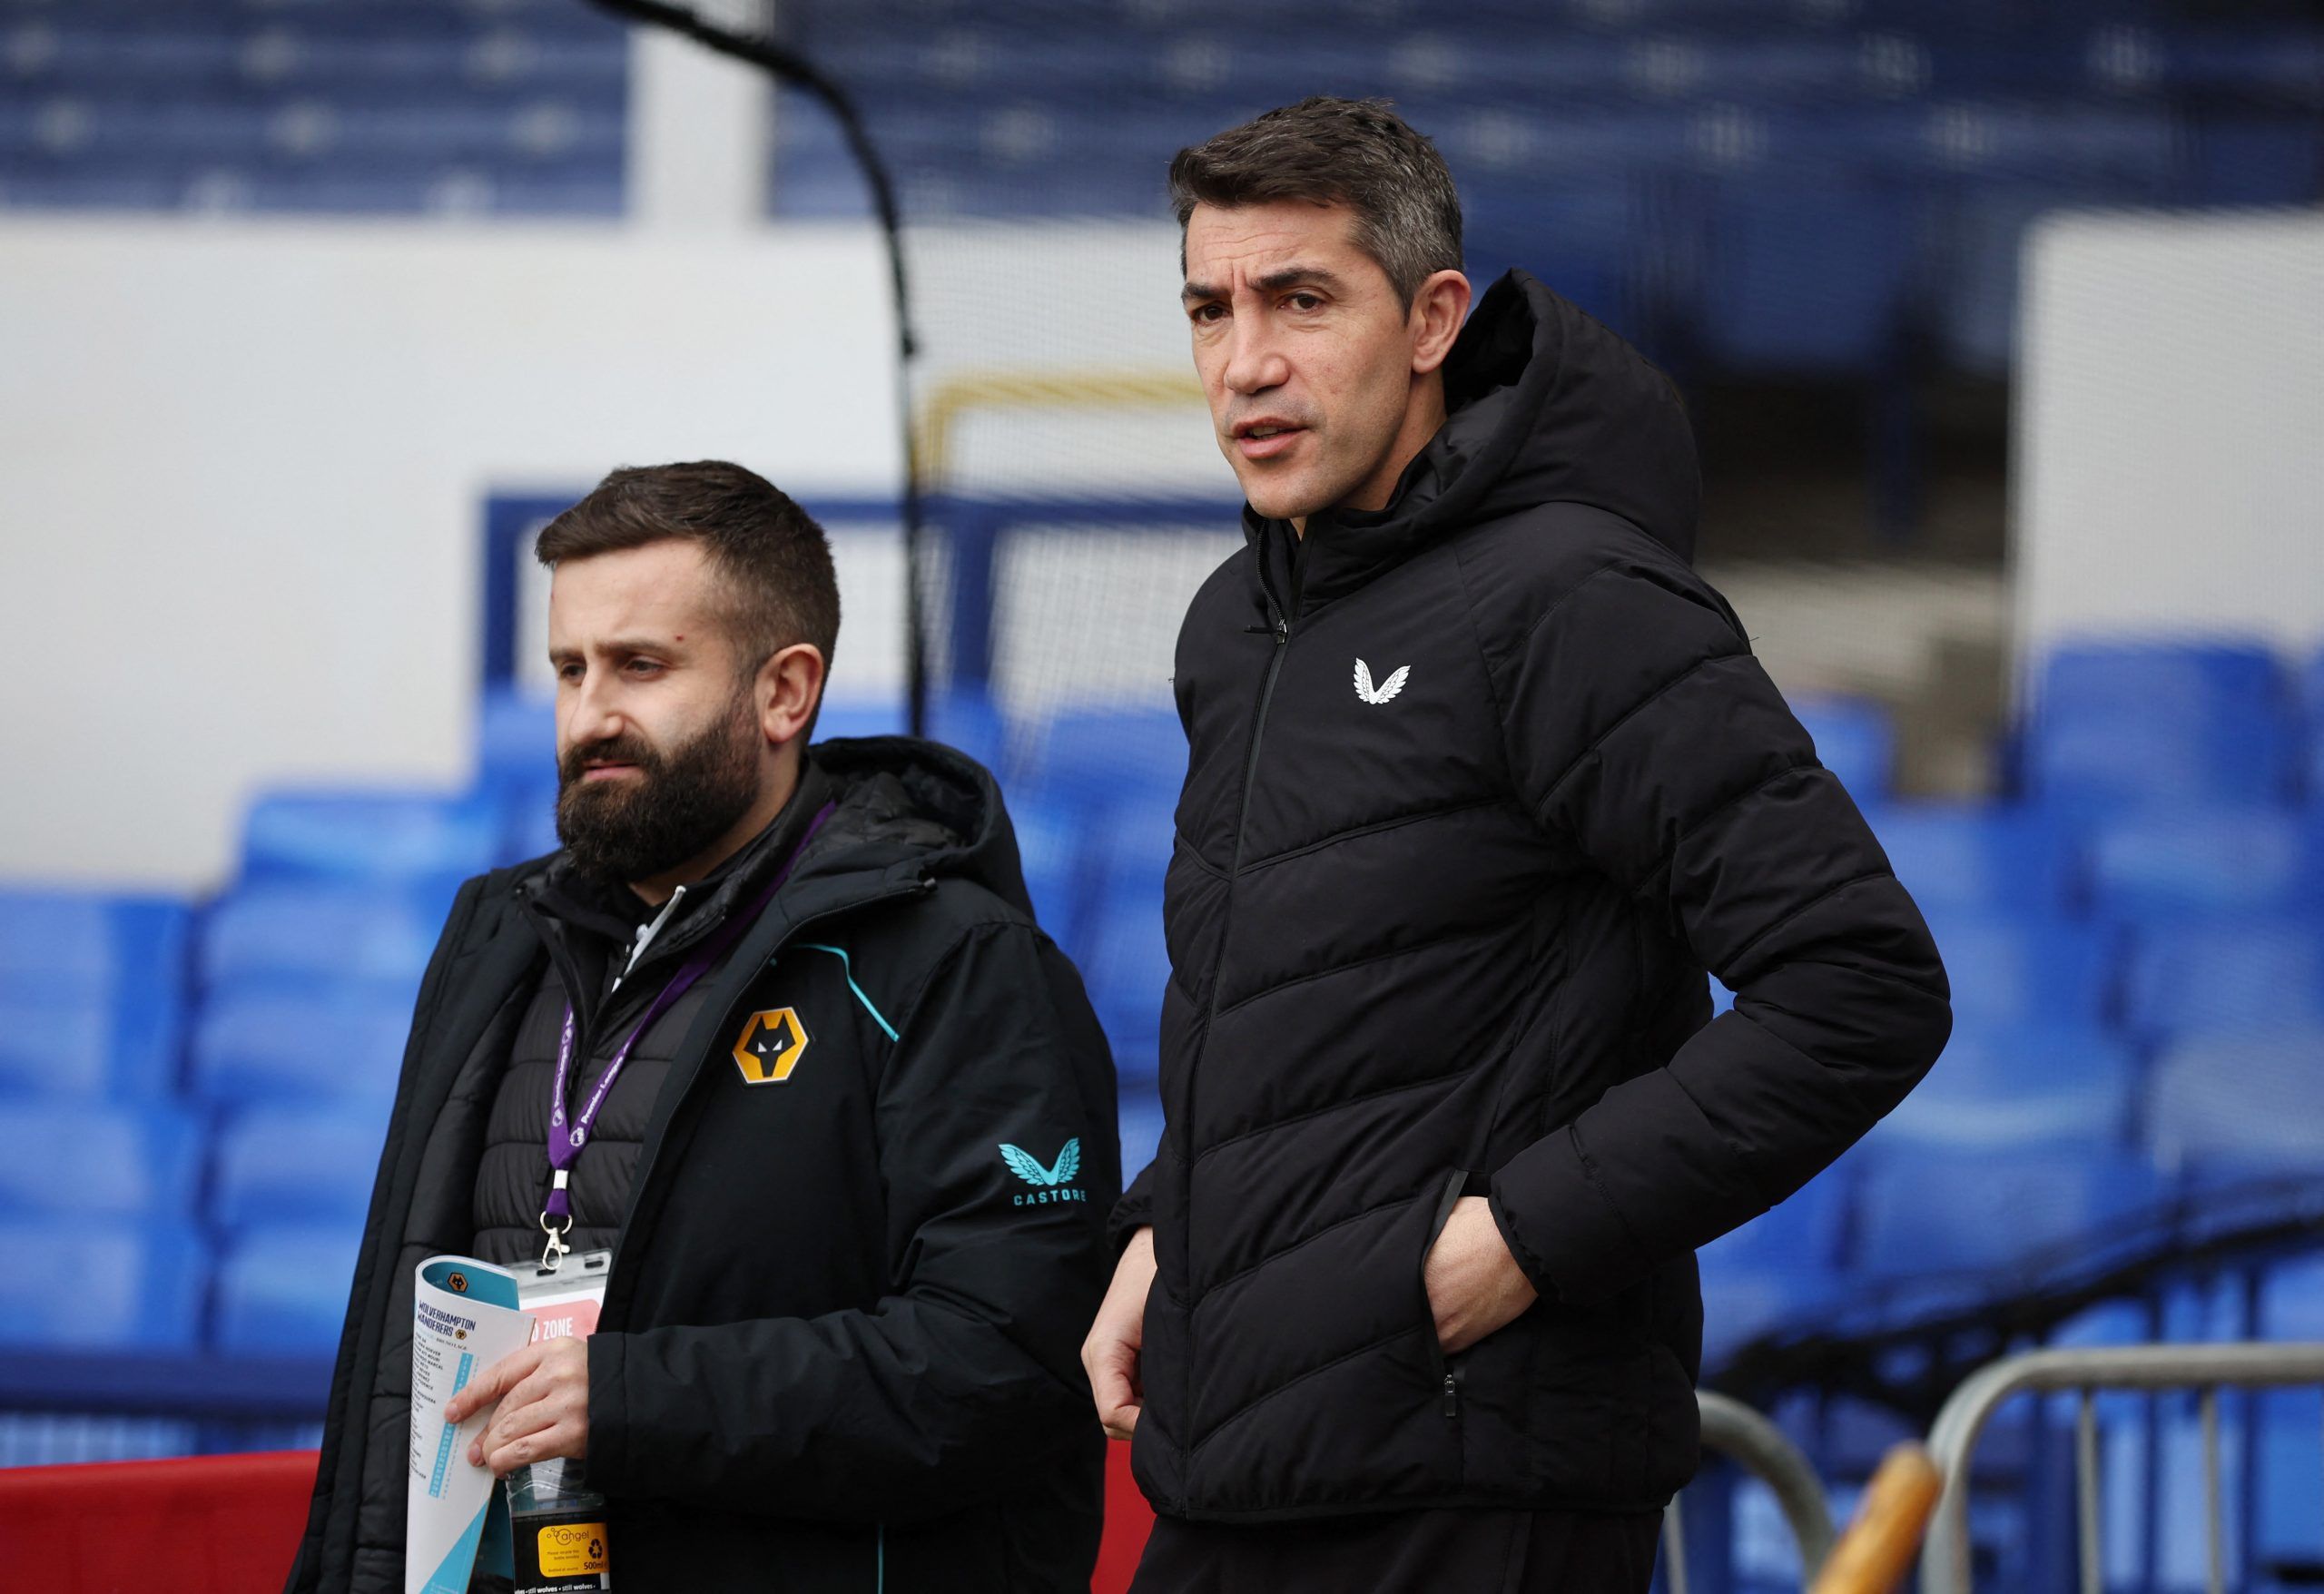 Bruno Lage, Fosun, Jeff Shi, Molineux, The Old Gold, Wolves, Wolves fans, Wolves info, Wolves latest, Wolves news, Wolves updates, WWFC, WWFC news, WWFC update, Premier League, Premier League news, Wolverhampton Wanderers, Ruben Neves, Transfer Focus, Martim Neto, 
